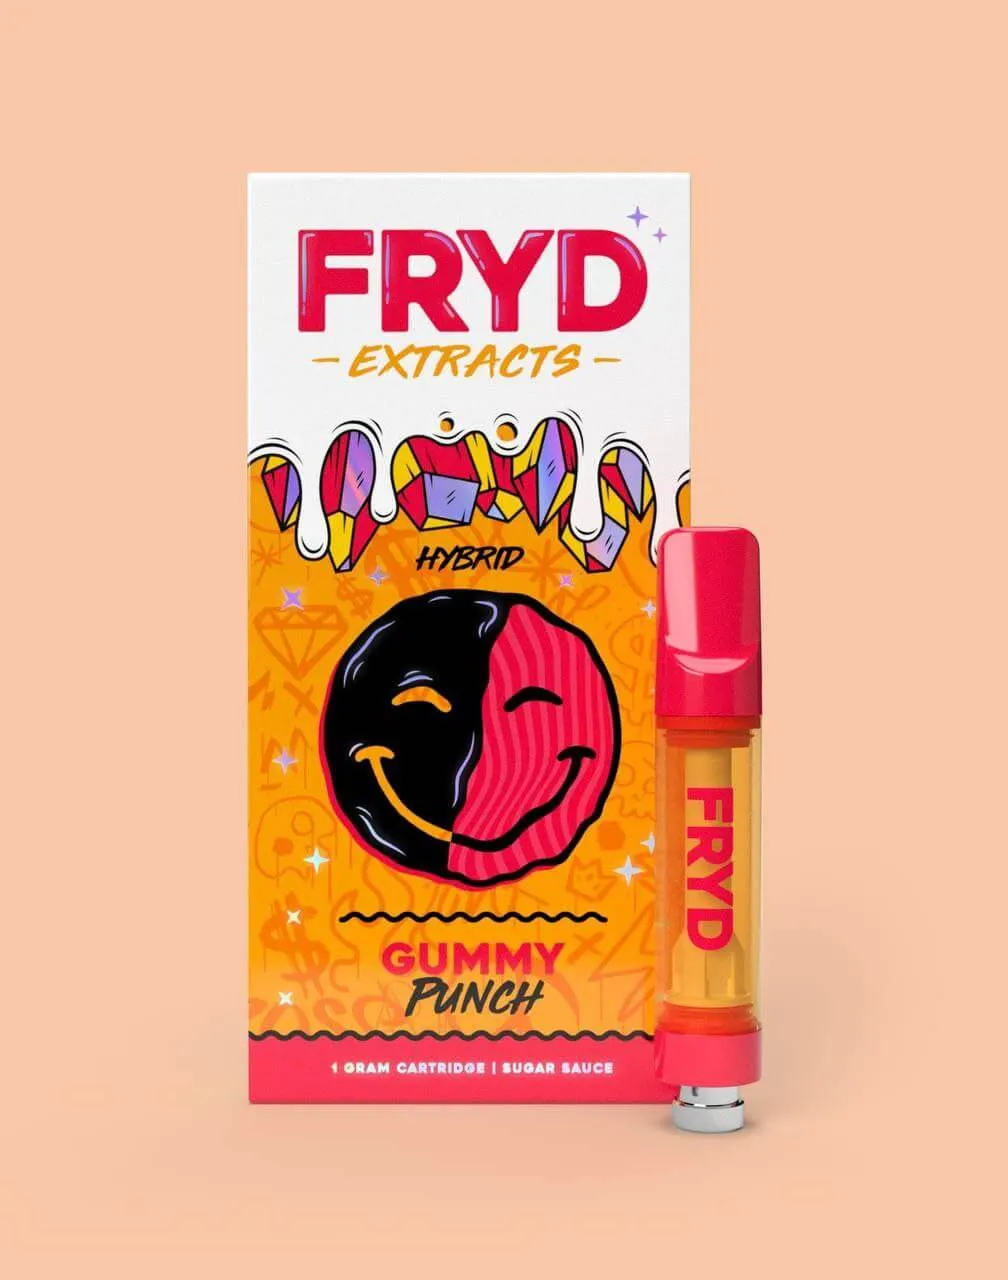 Fryd Disposable Vape: The Perfect Solution for On-the-Go THC Consumption